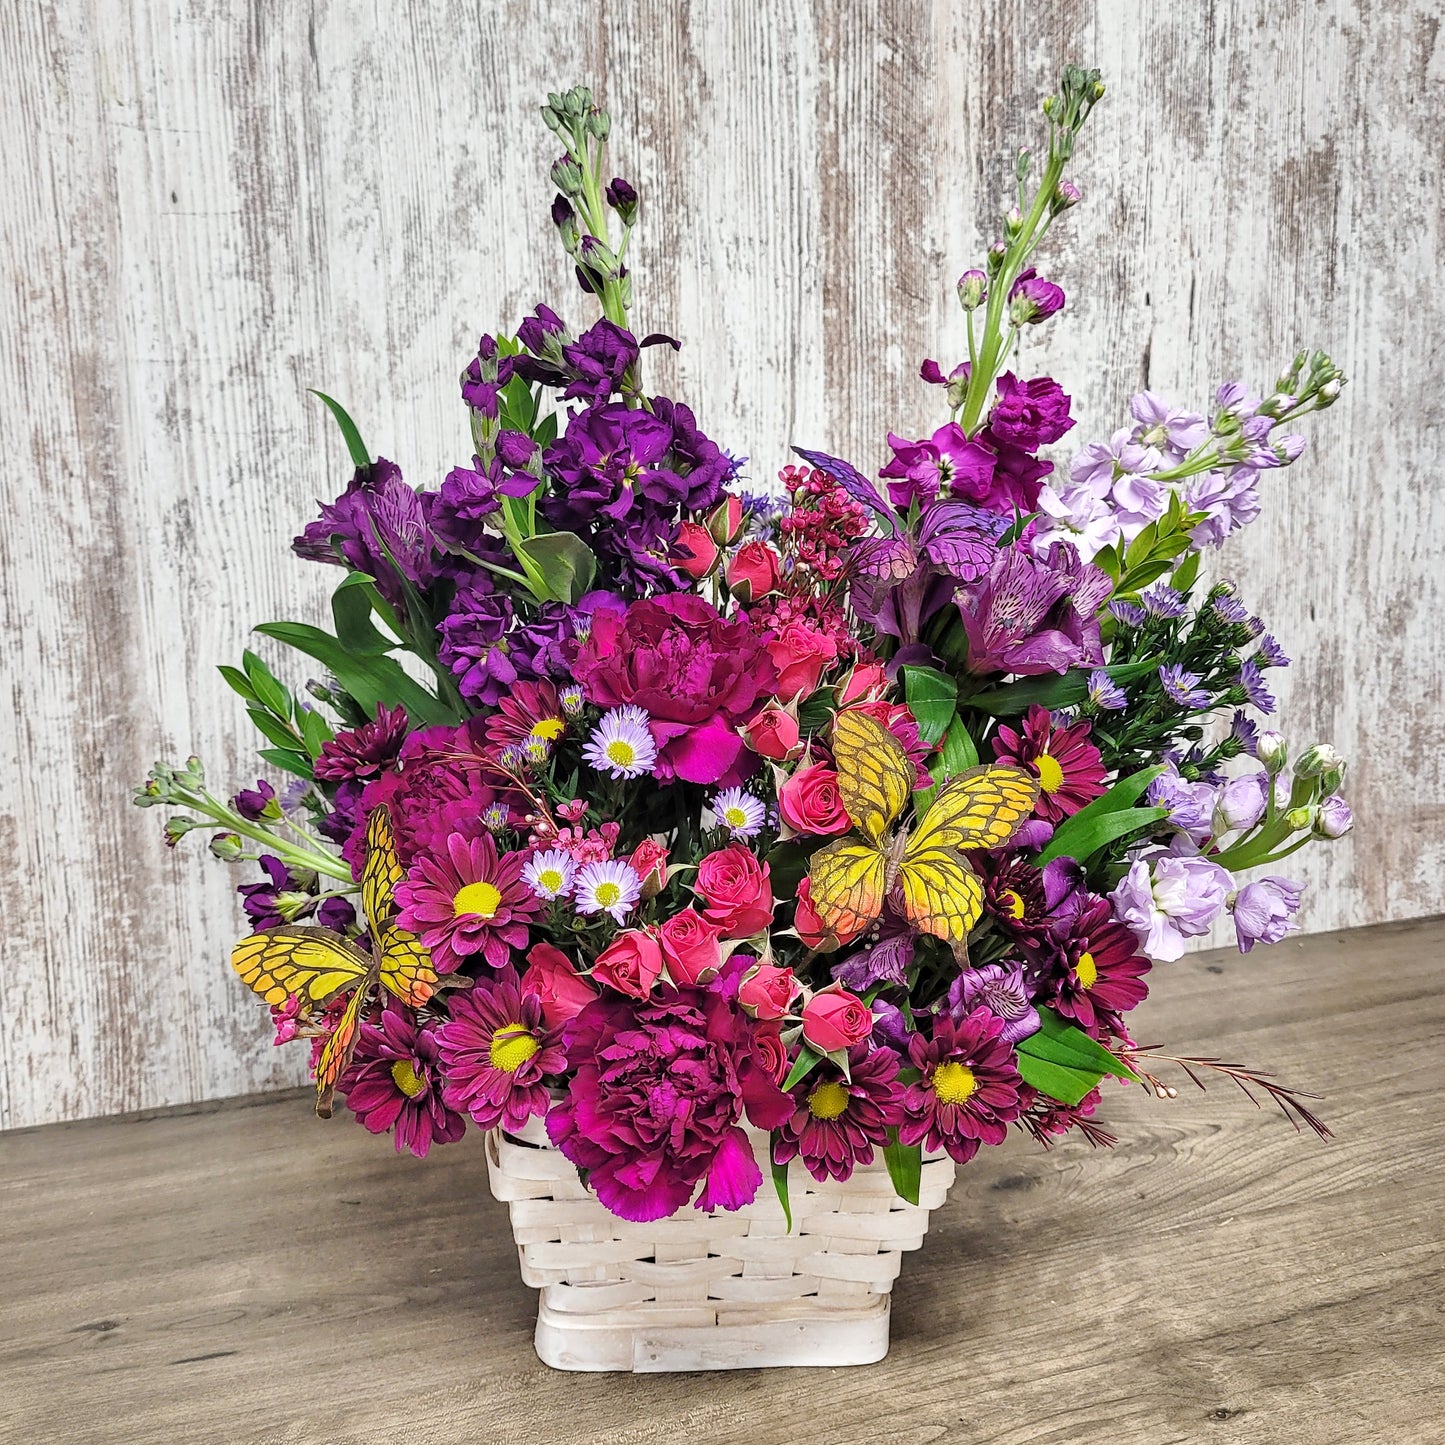 Country Blooms Basket